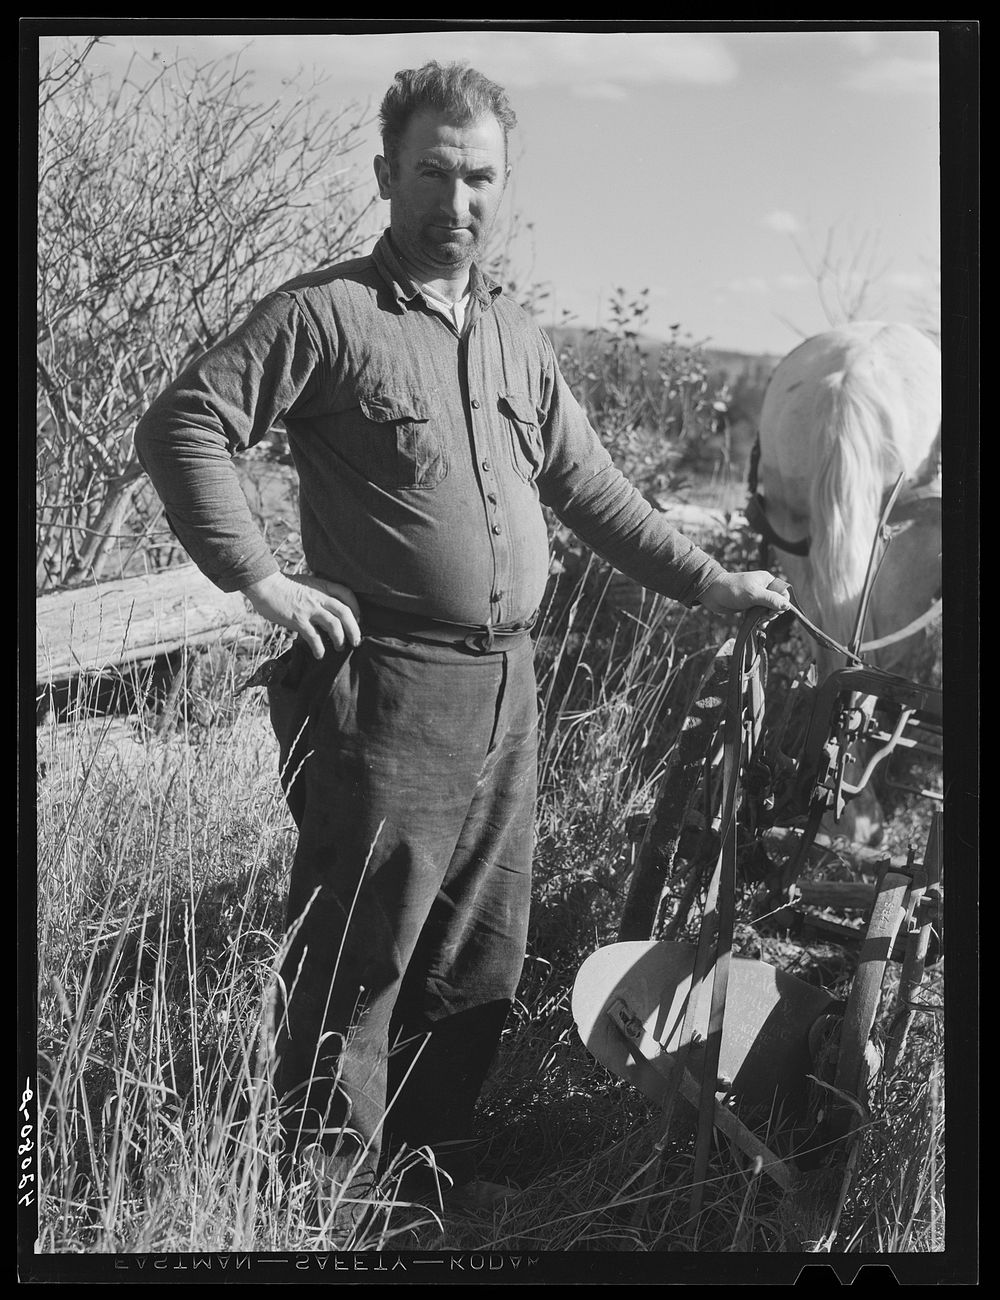 A Swedish potato farmer of New Sweden, Maine. Sourced from the Library of Congress.